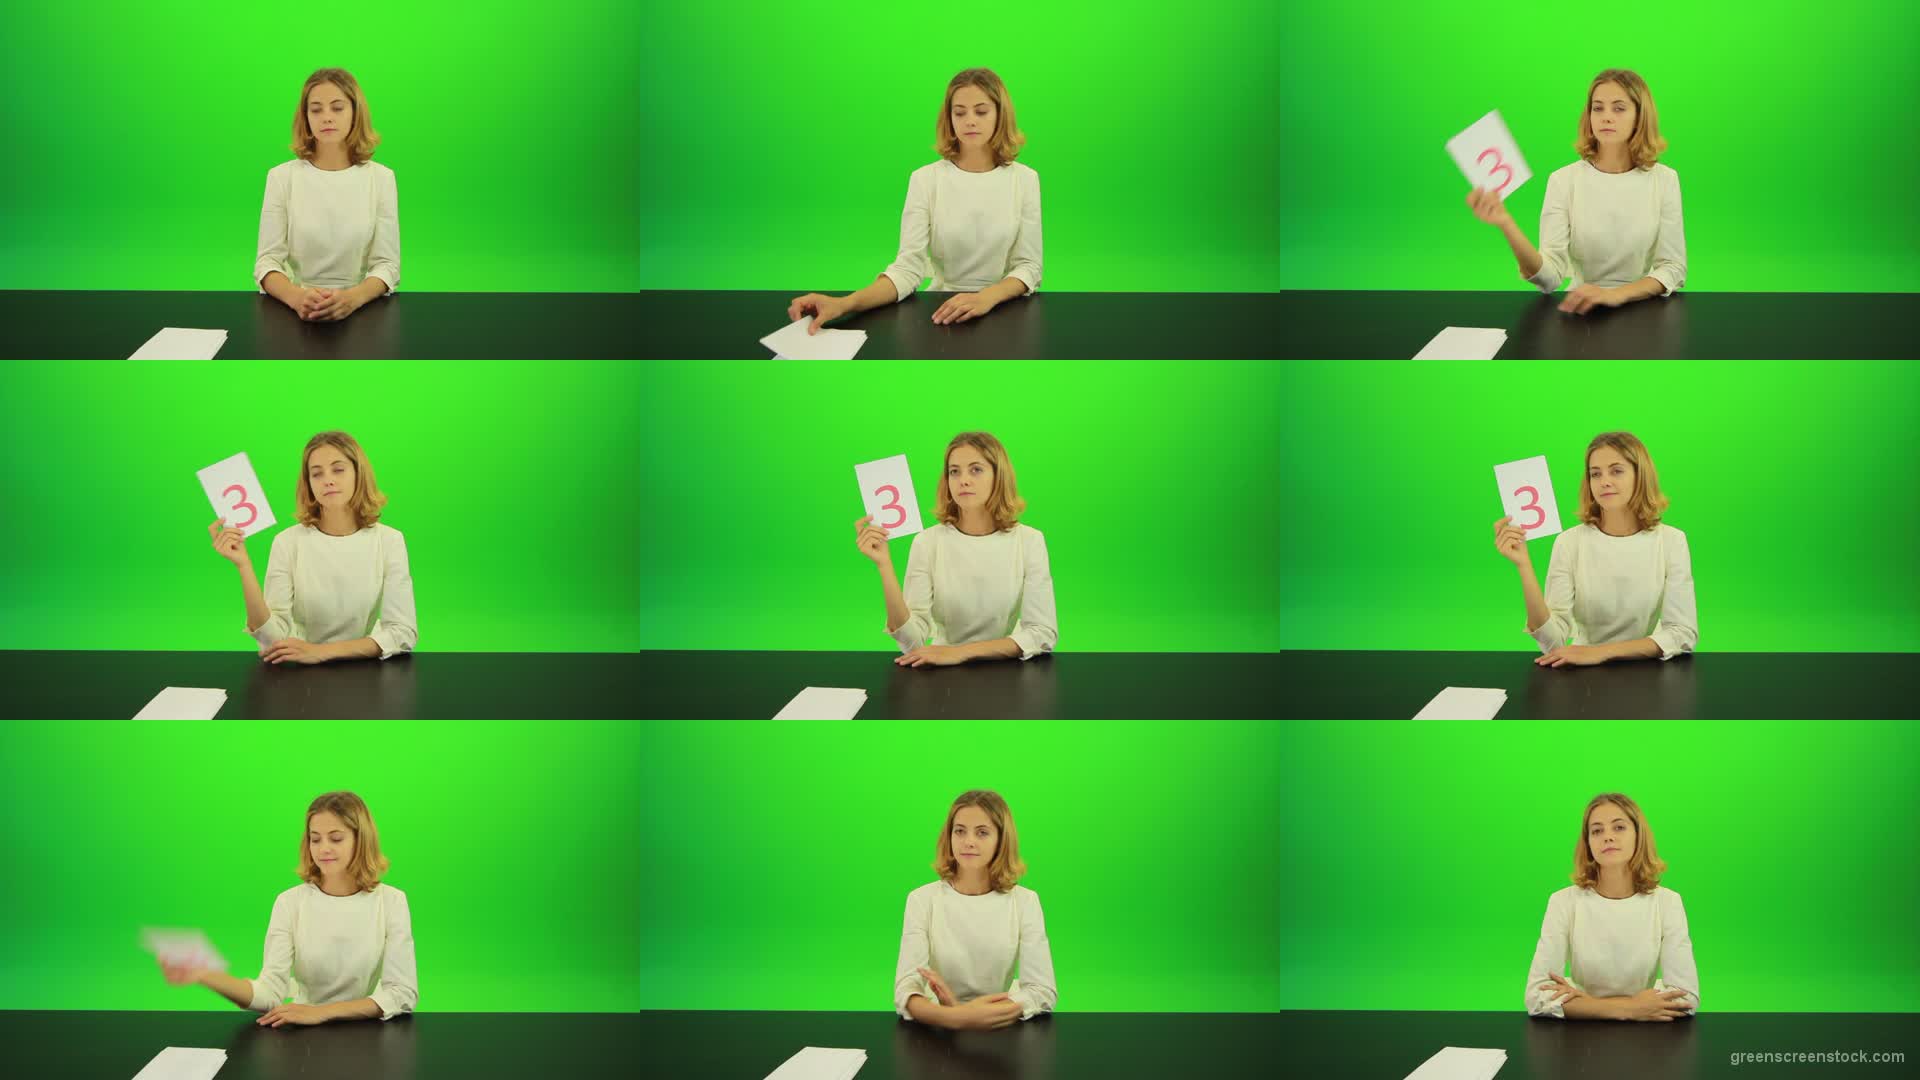 Blonde-hair-girl-in-white-shirt-give-3-point-mark-score-Full-HD-Green-Screen-Video-Footage Green Screen Stock